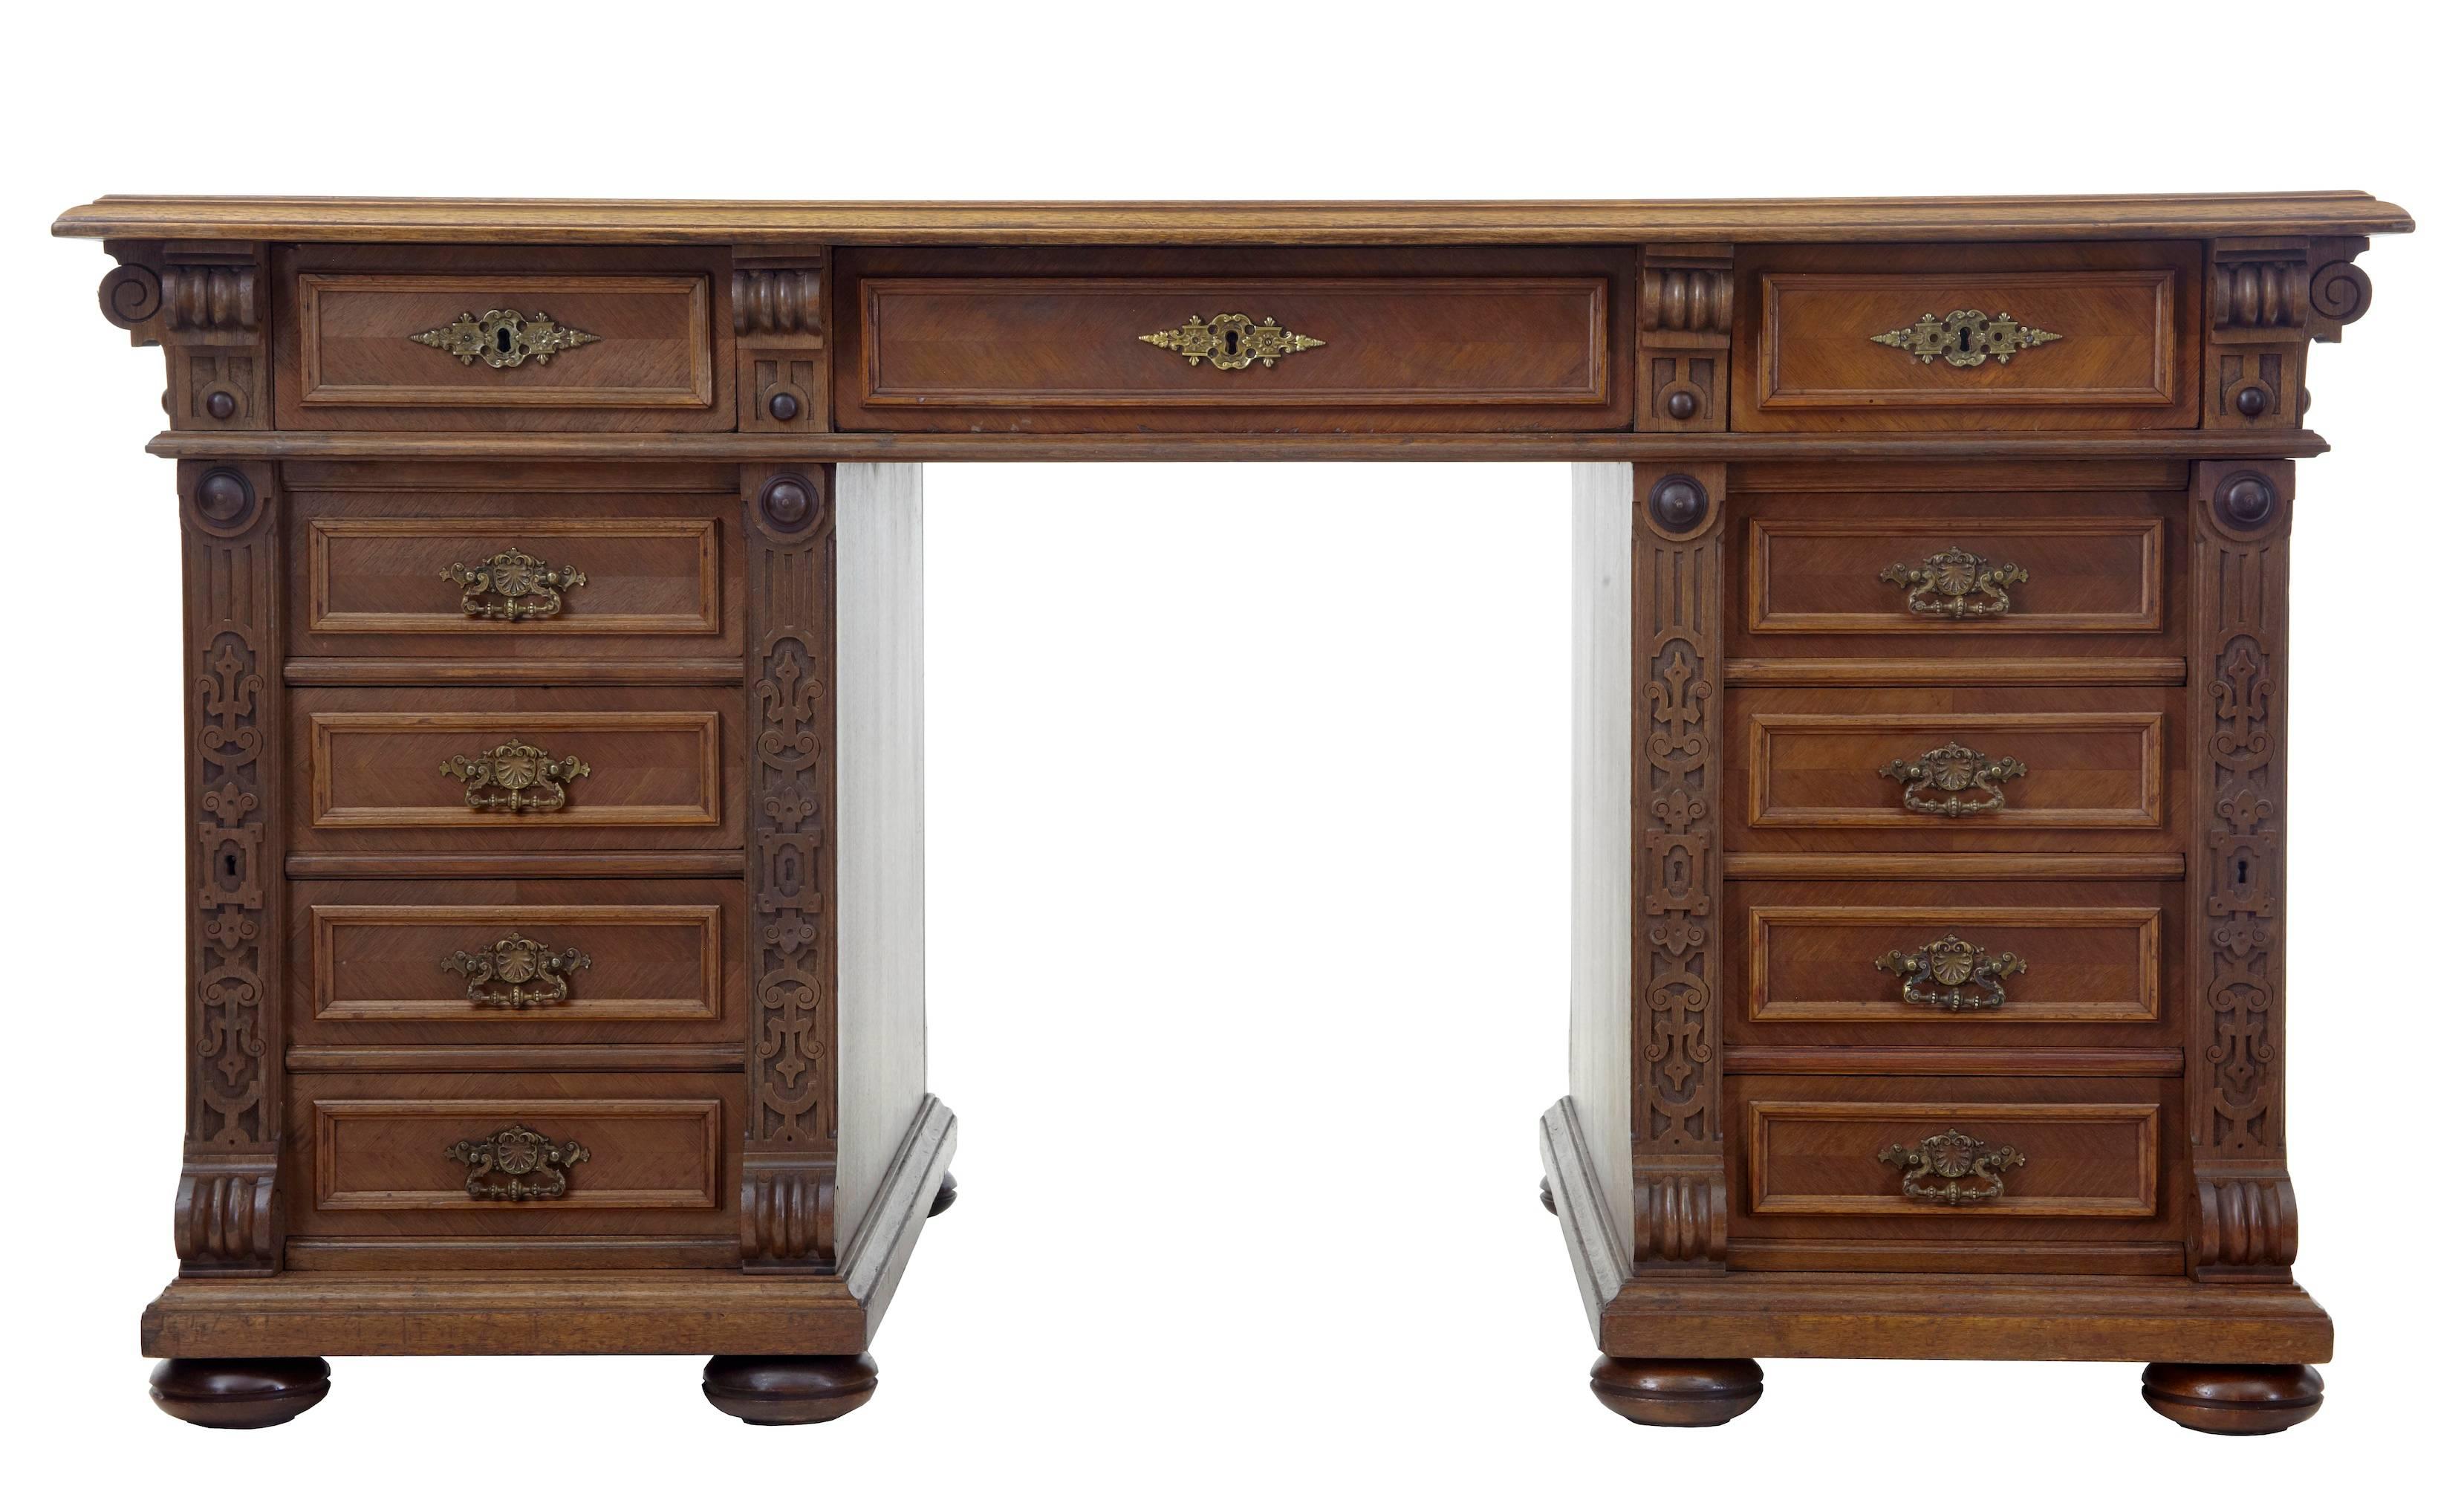 Good quality walnut pedestal desk, circa 1870.
Partners desk with drawers being fitted both sides.
Brand new good leather writing surface with gold tooling.
Three drawers to the writing surface and four drawers in each pedestal, mirrored on the